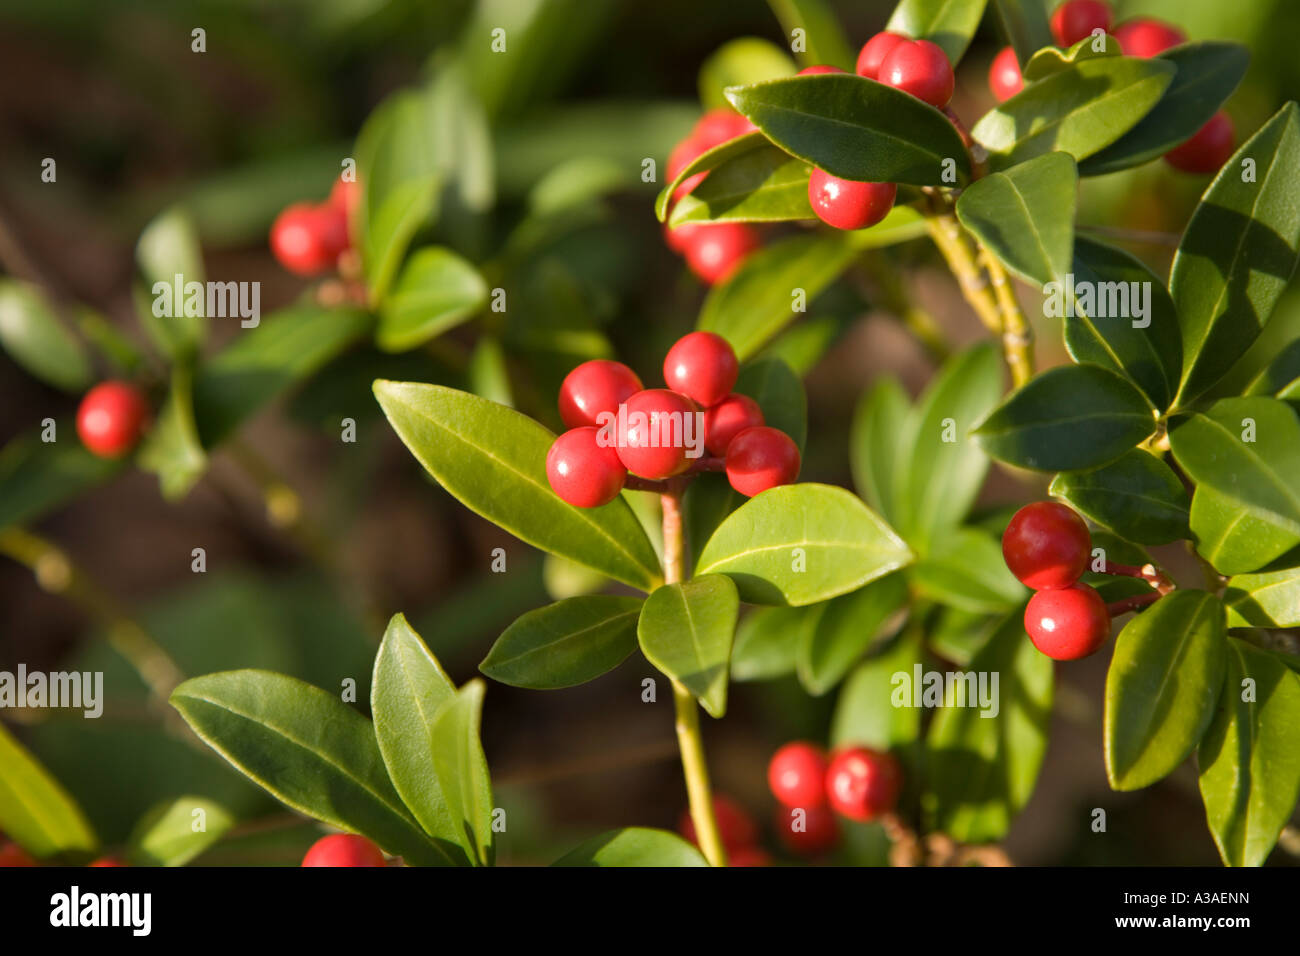 Skimmia plant with red berries. Stock Photo